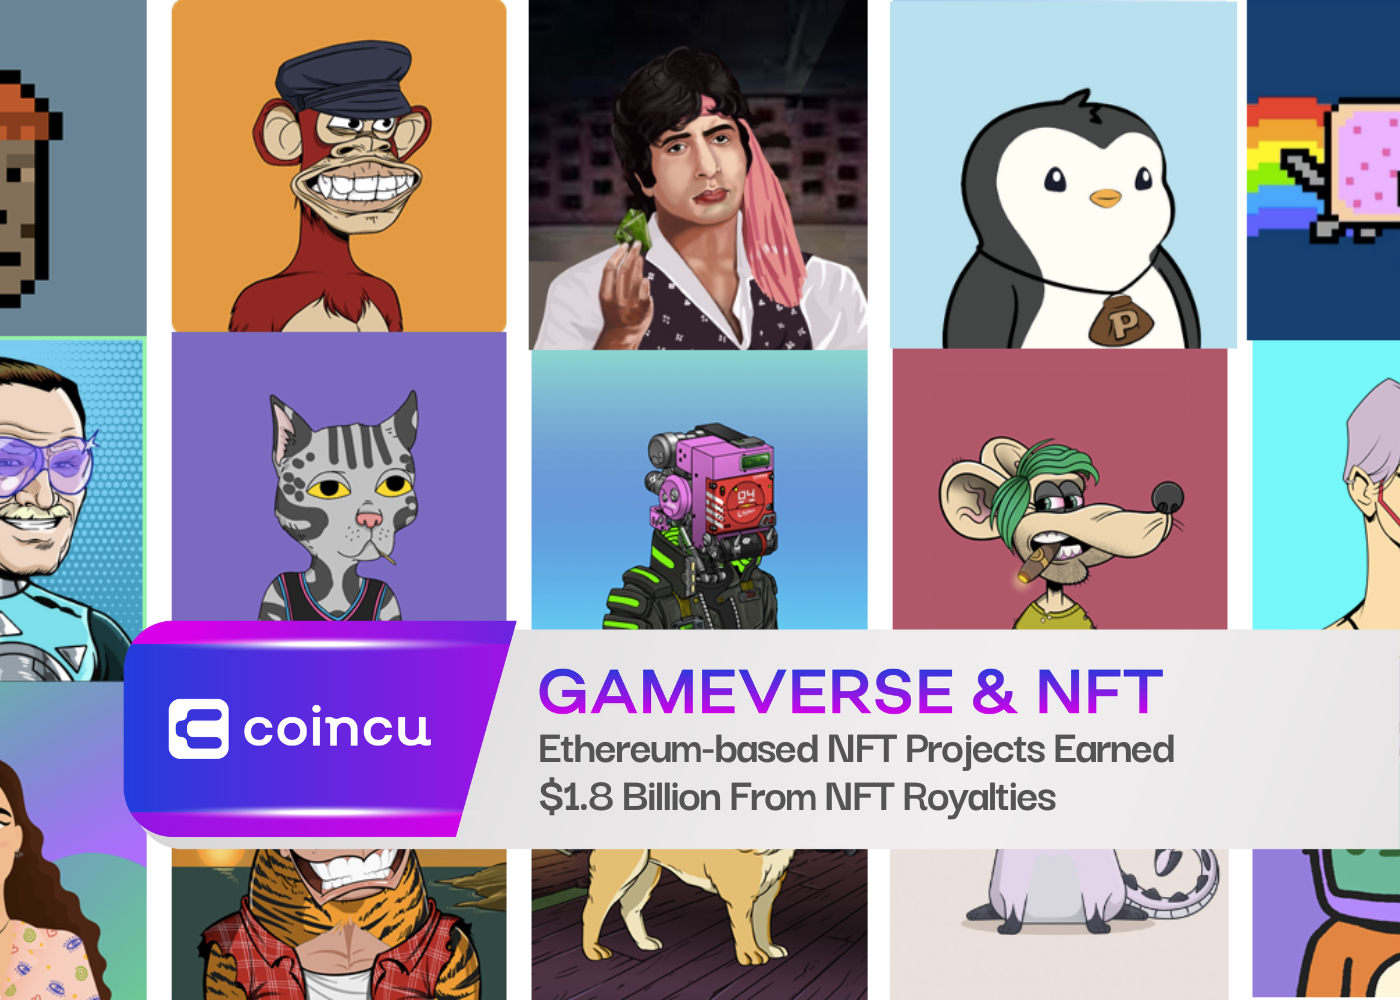 Ethereum-based NFT Projects Earned $1.8 Billion From NFT Royalties